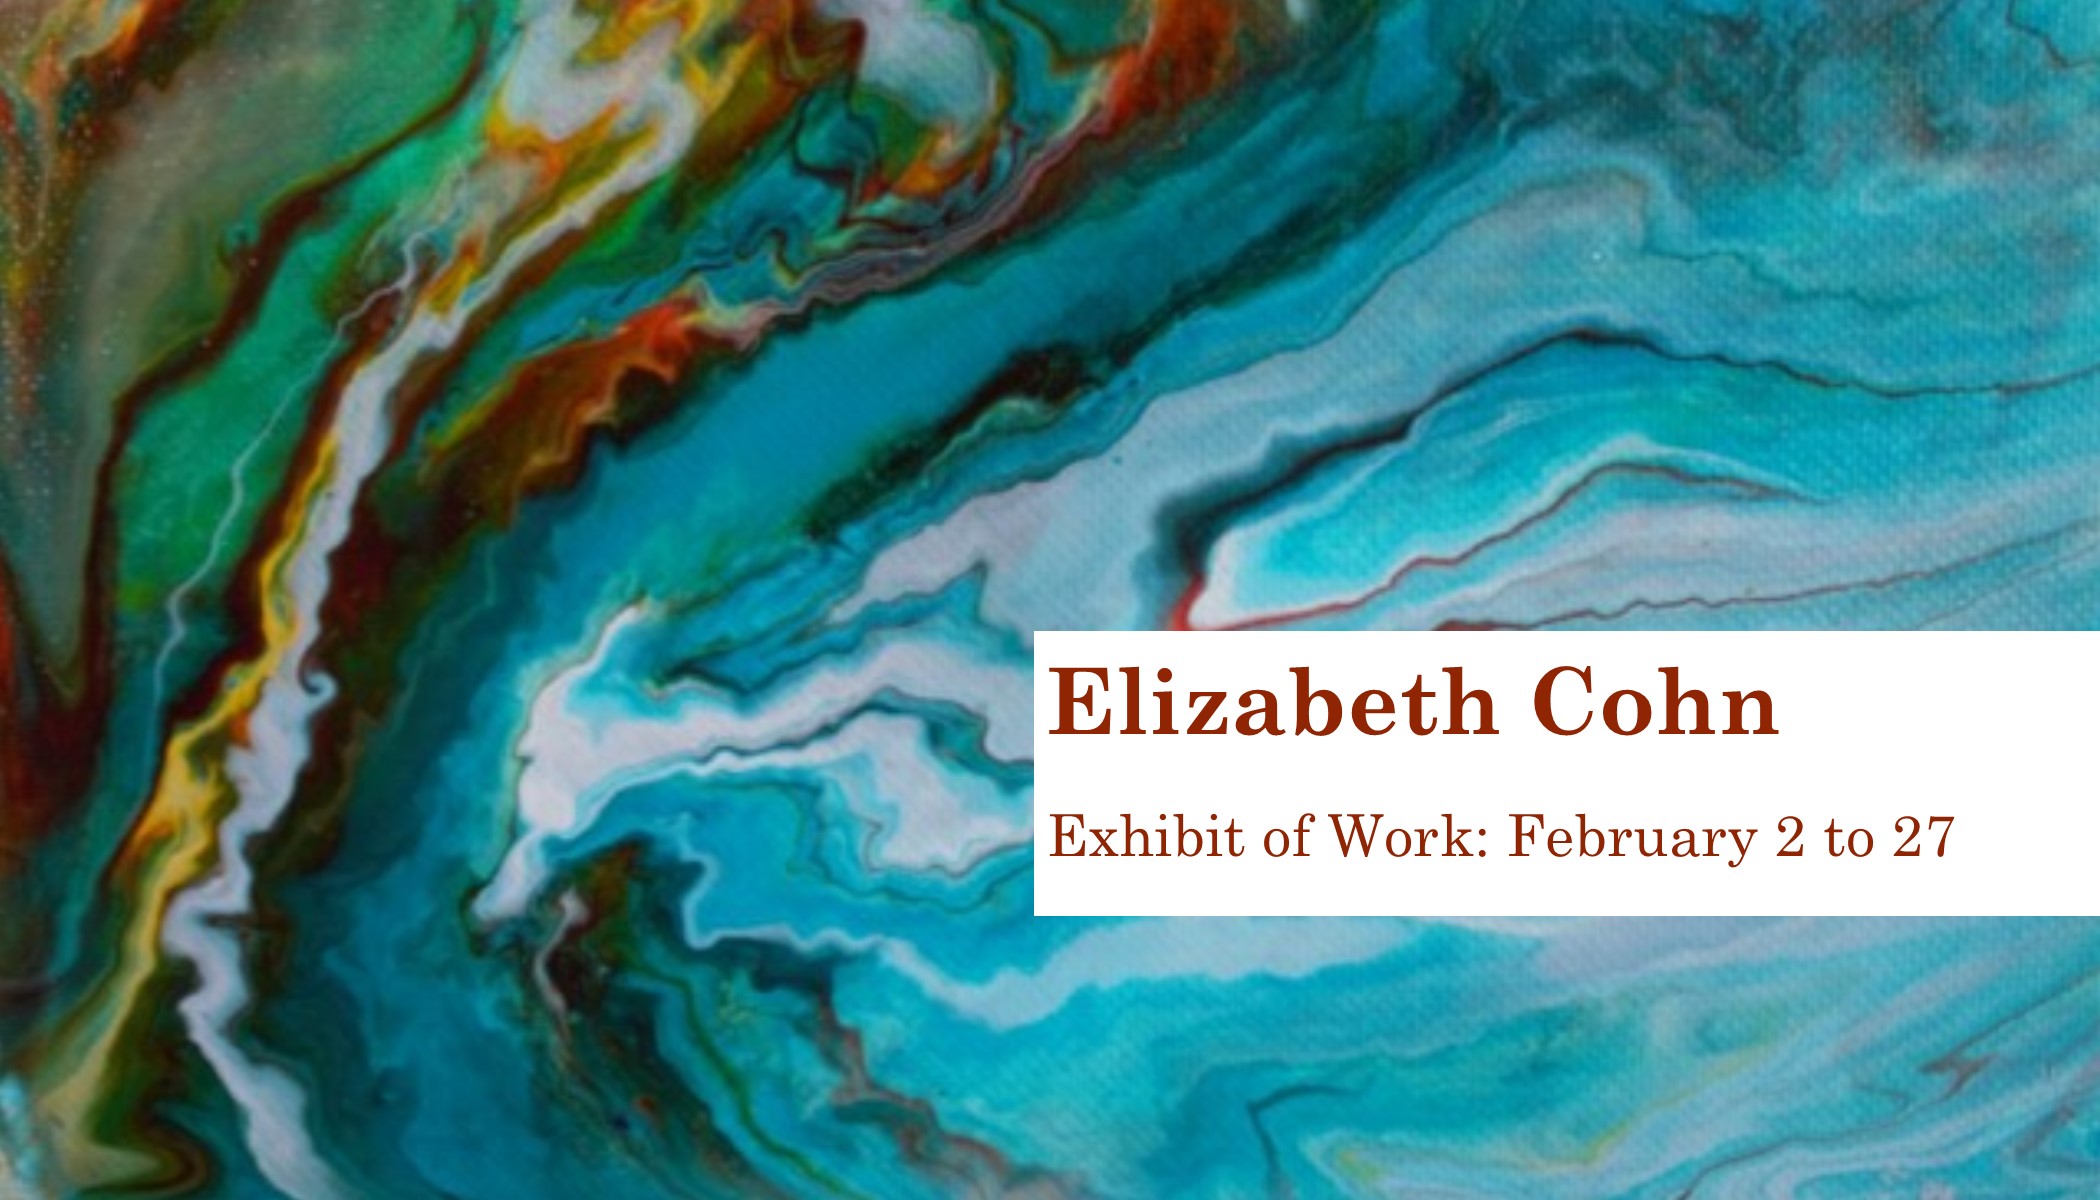 Elizabeth Cohn Art Exhibit up for the month of February